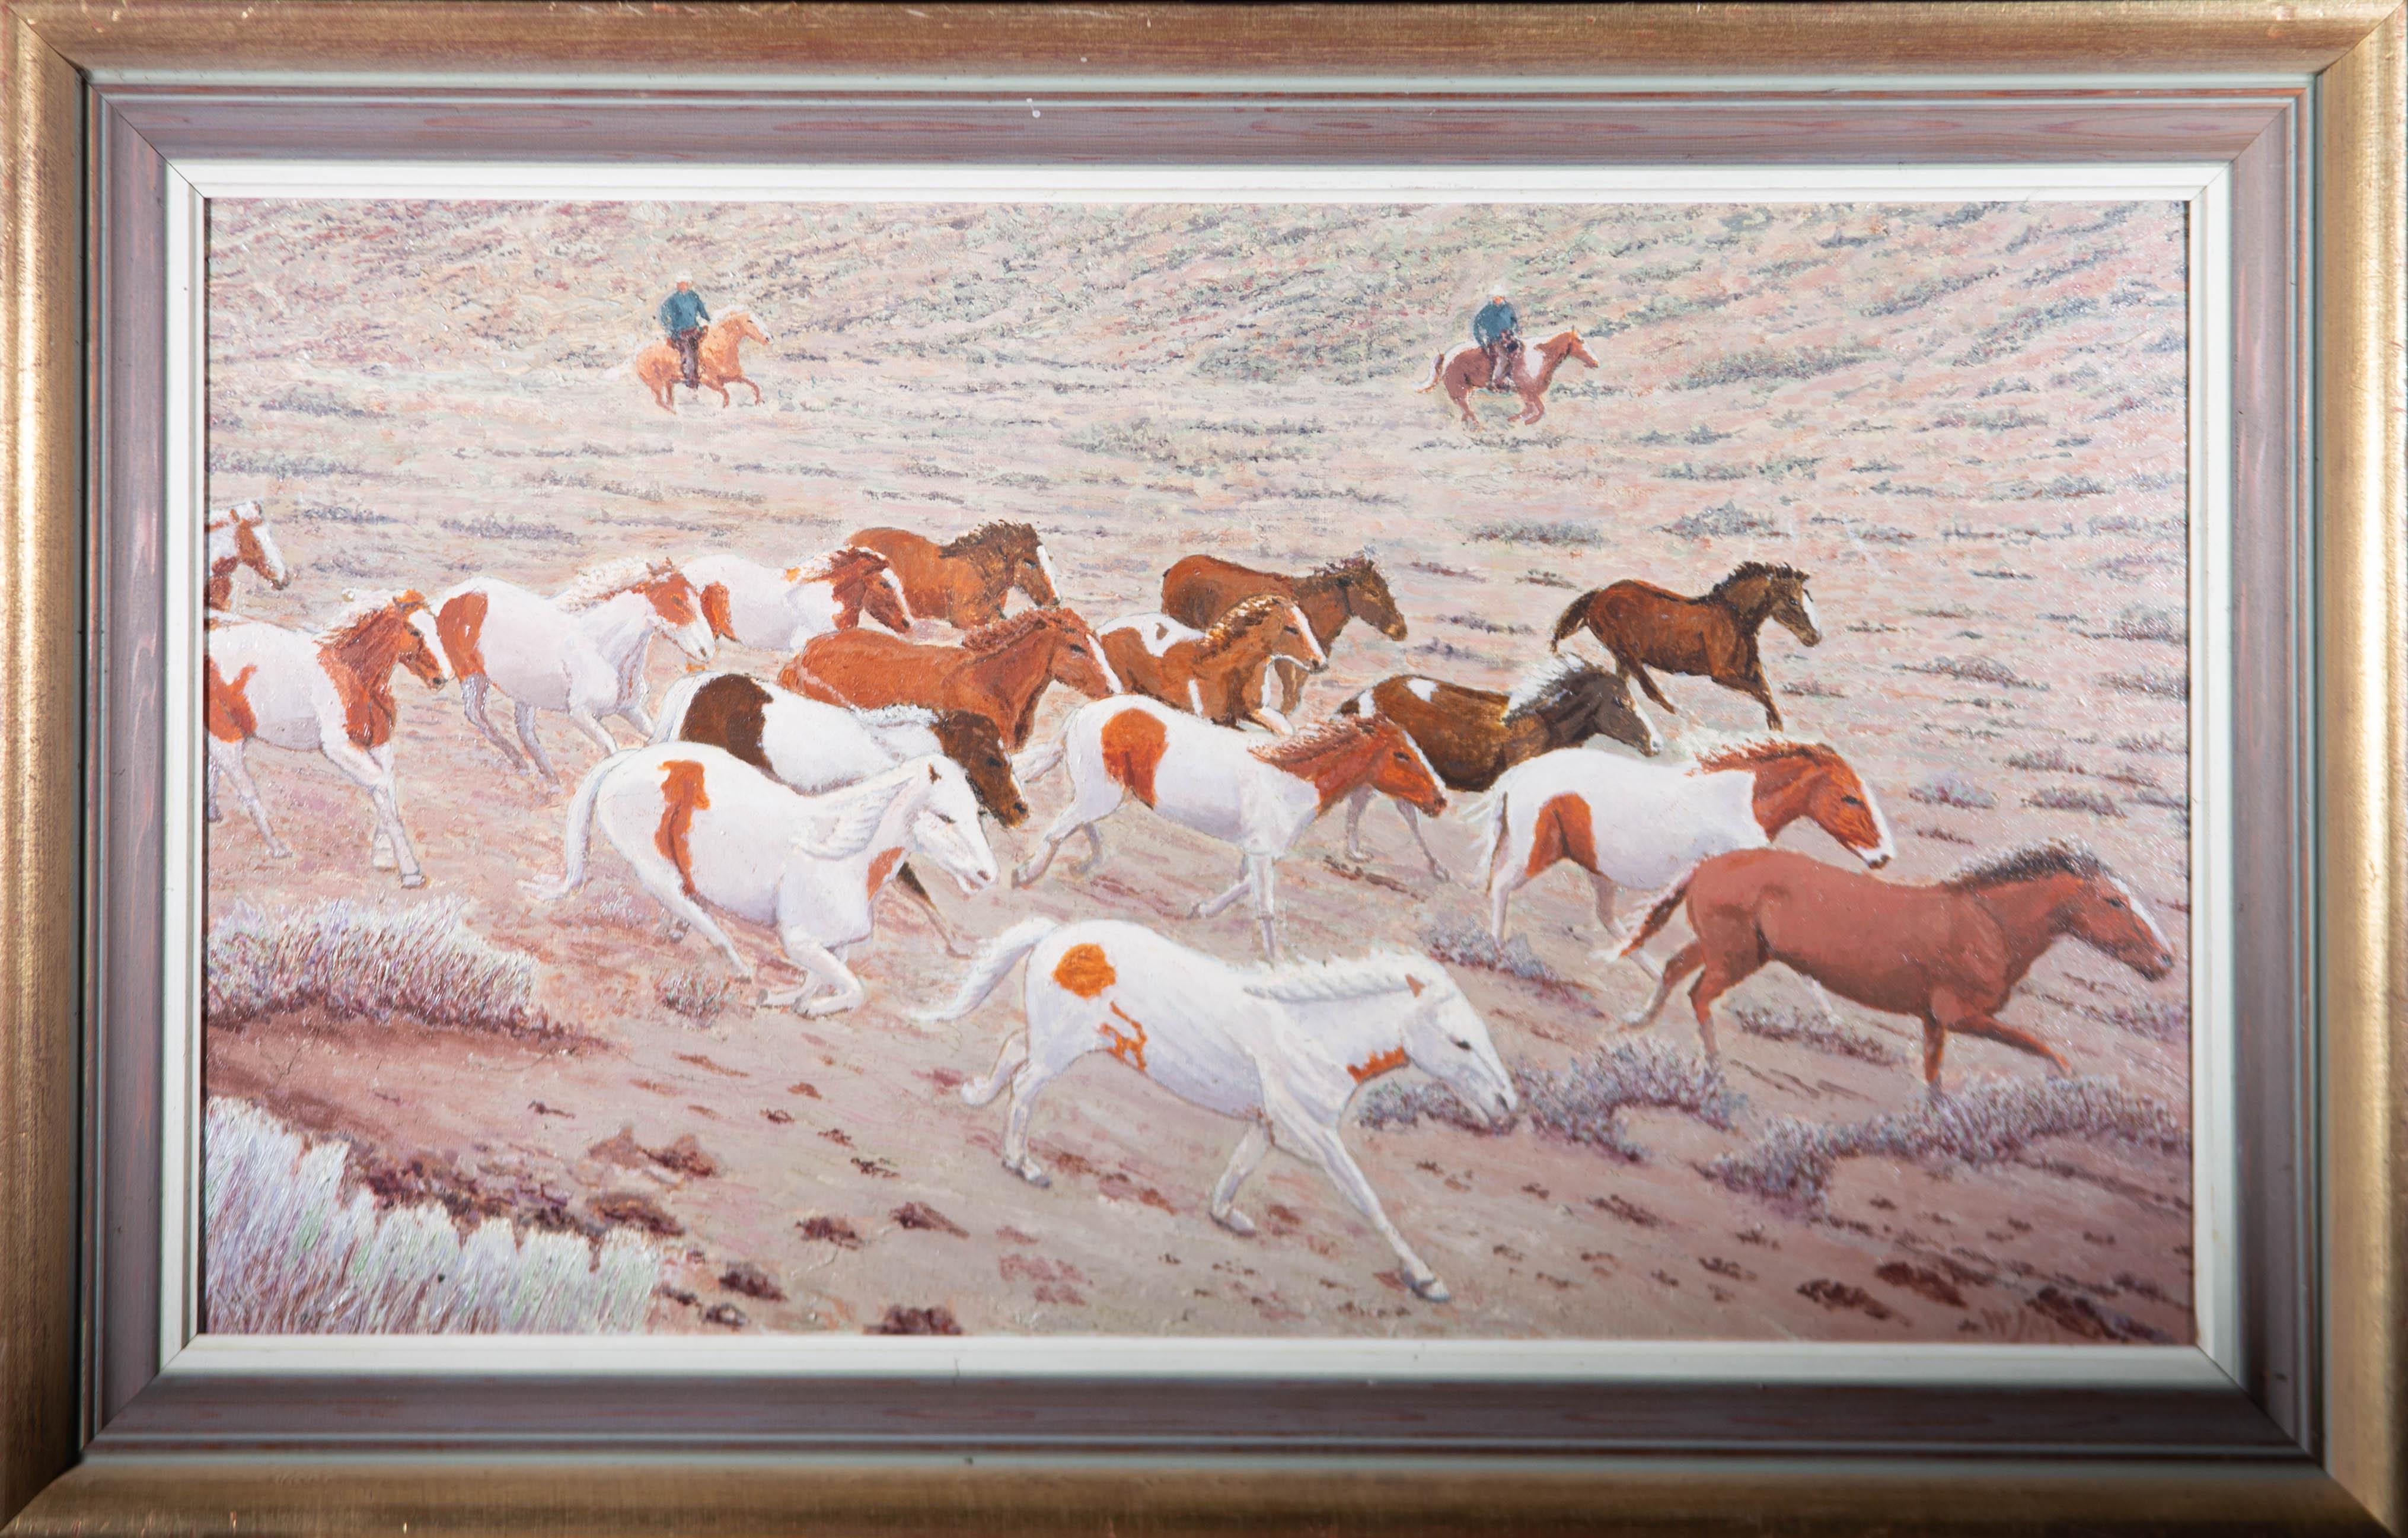 Unknown Landscape Painting - W.M. - 20th Century Oil, Herd of Wild Horses